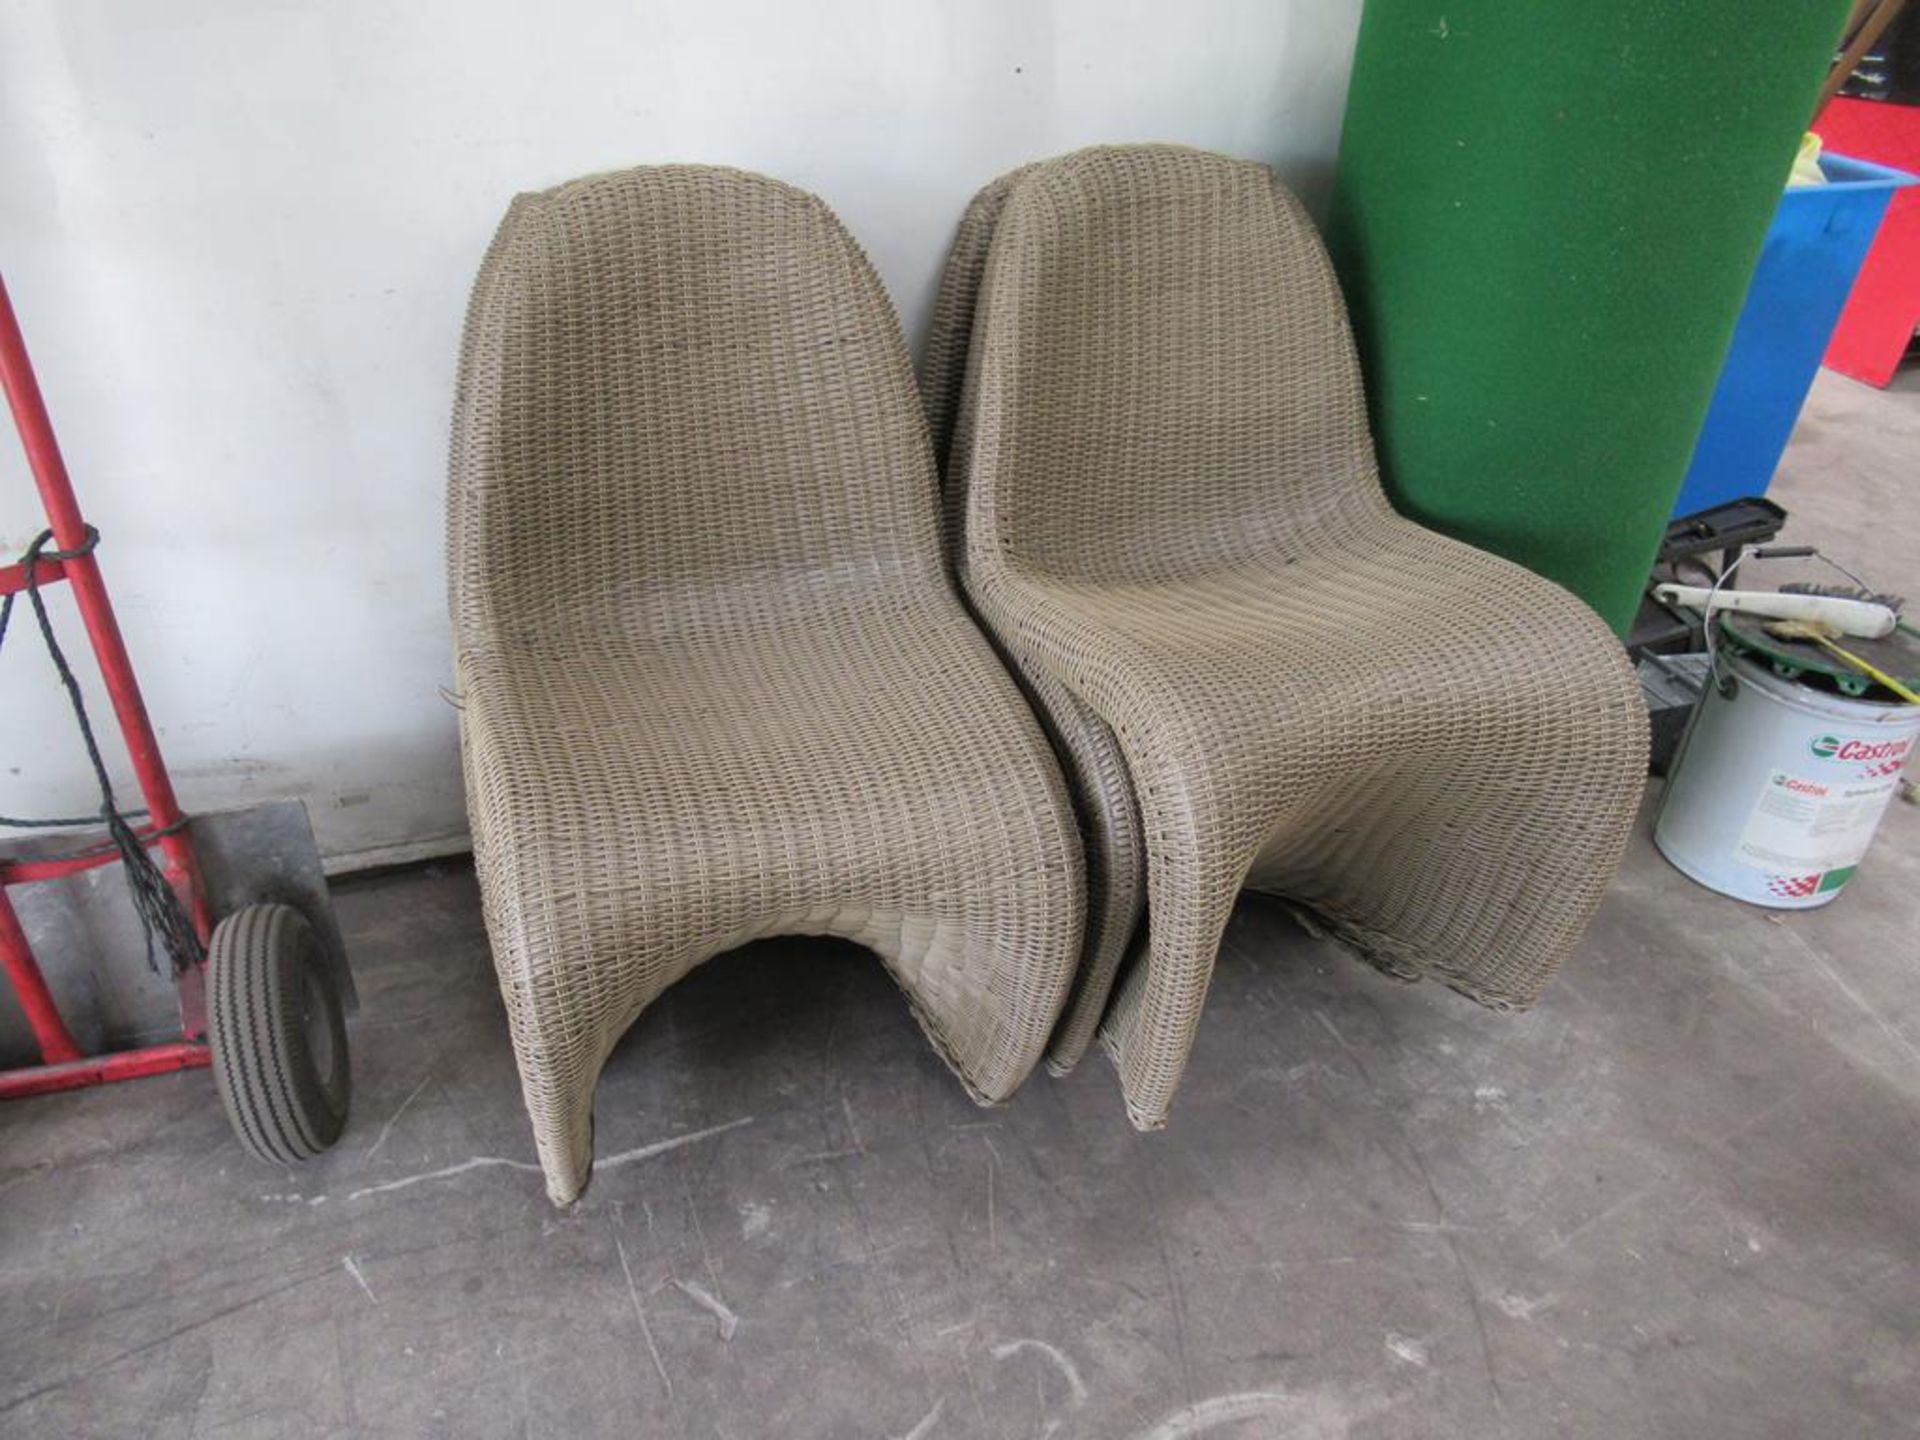 5 x wicker chairs - Image 2 of 2